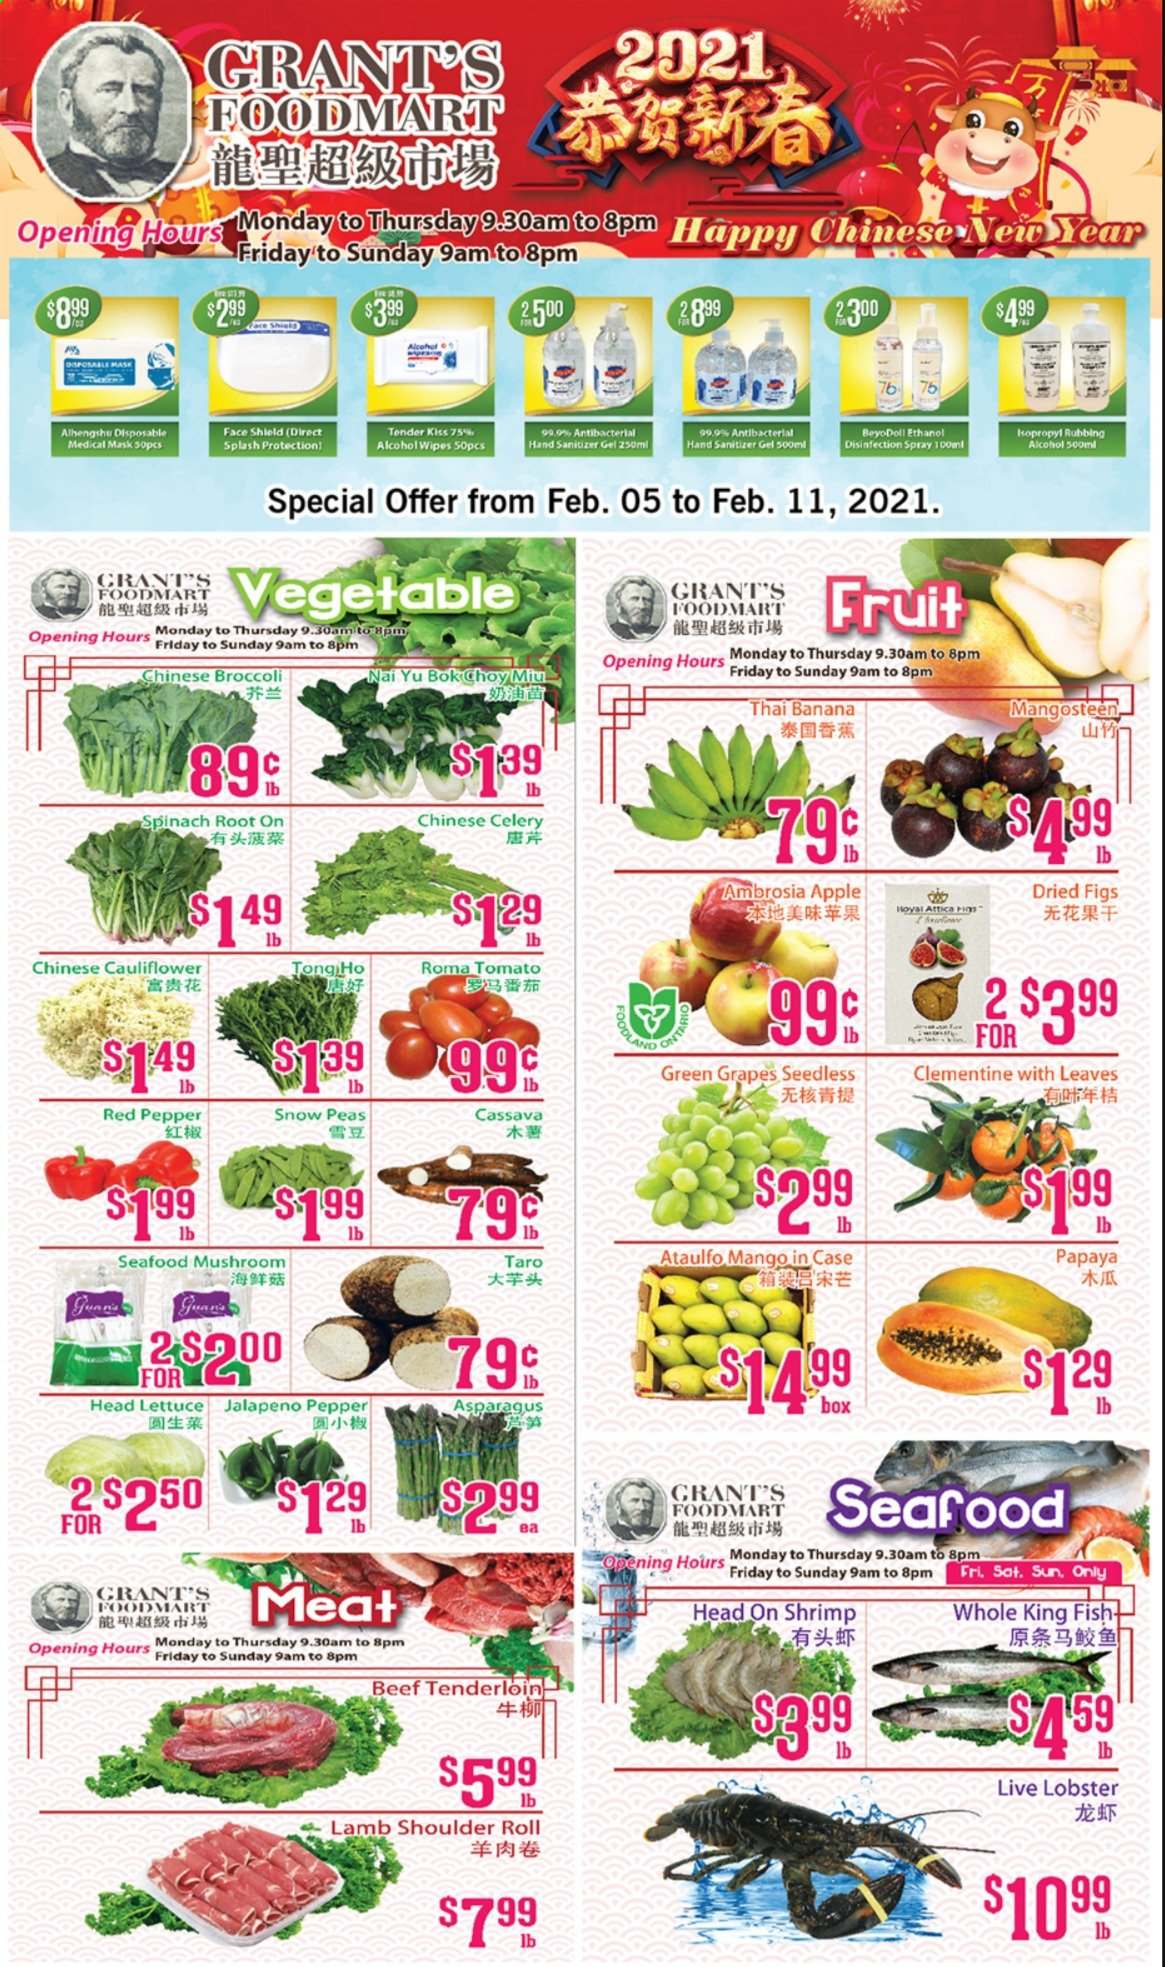 thumbnail - Grant's Foodmart Flyer - February 05, 2021 - February 11, 2021 - Sales products - mushrooms, asparagus, broccoli, cauliflower, celery, spinach, tomatoes, peas, lettuce, jalapeño, cassava, figs, grapes, mango, lobster, seafood, fish, king fish, shrimps, snow peas, dried figs, Grant's, beef meat, beef tenderloin, lamb meat, lamb shoulder, wipes, hand sanitizer, chinese broccoli. Page 1.